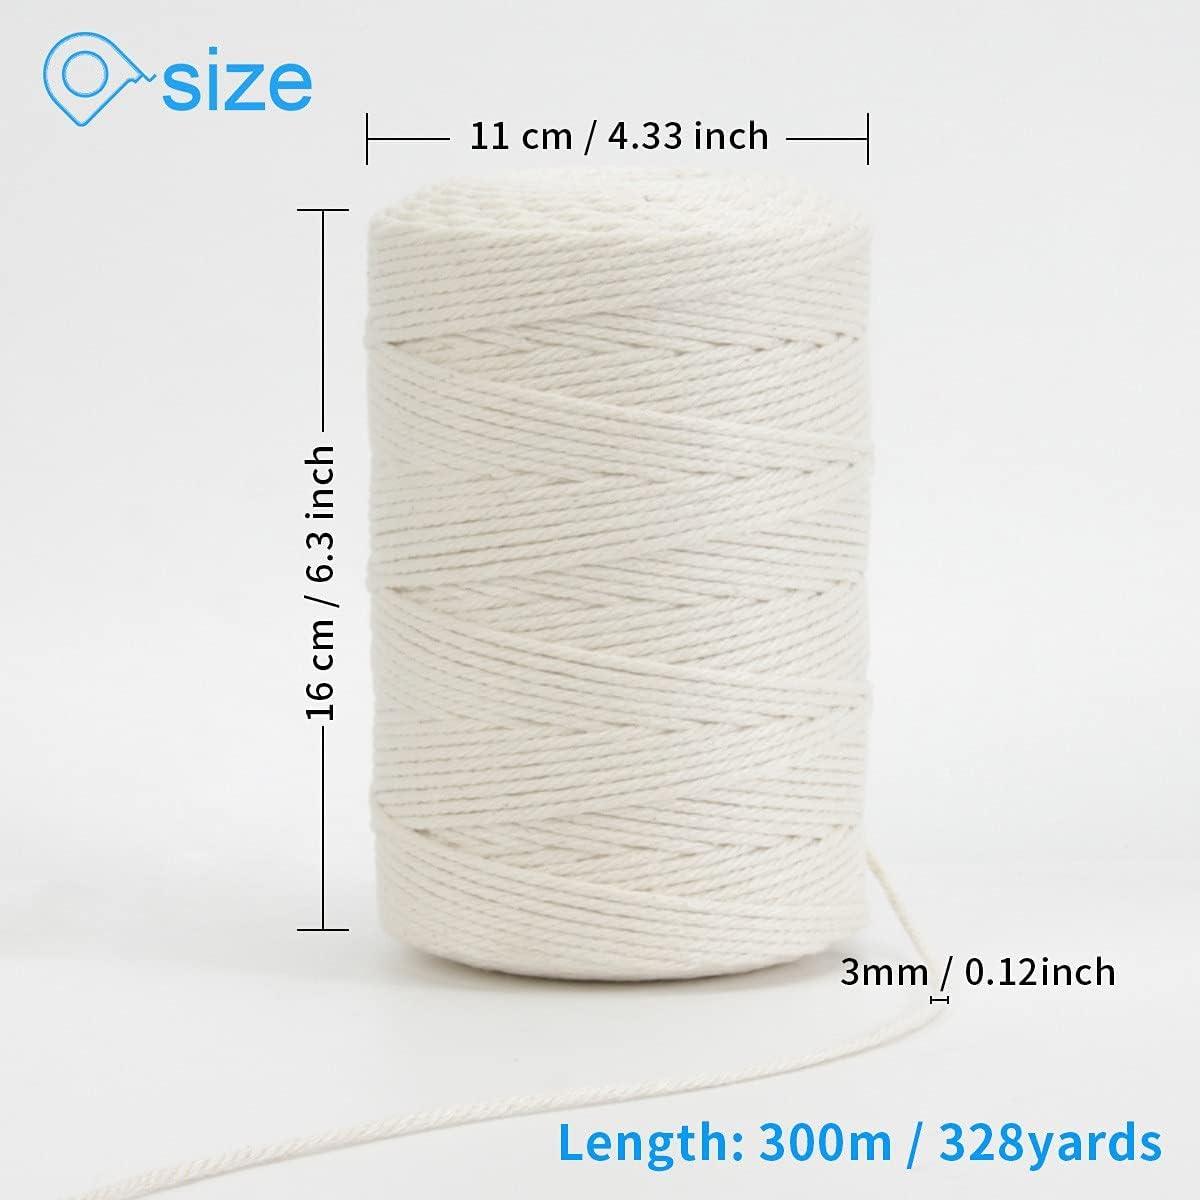 Macrame Cord, DAOFARY 100% Natural Cotton Rope 3mm x 328 Yards 4 Strand  Twisted Macrame Rope Cotton Twine String for DIY Crafts Knitting Dream  Catcher